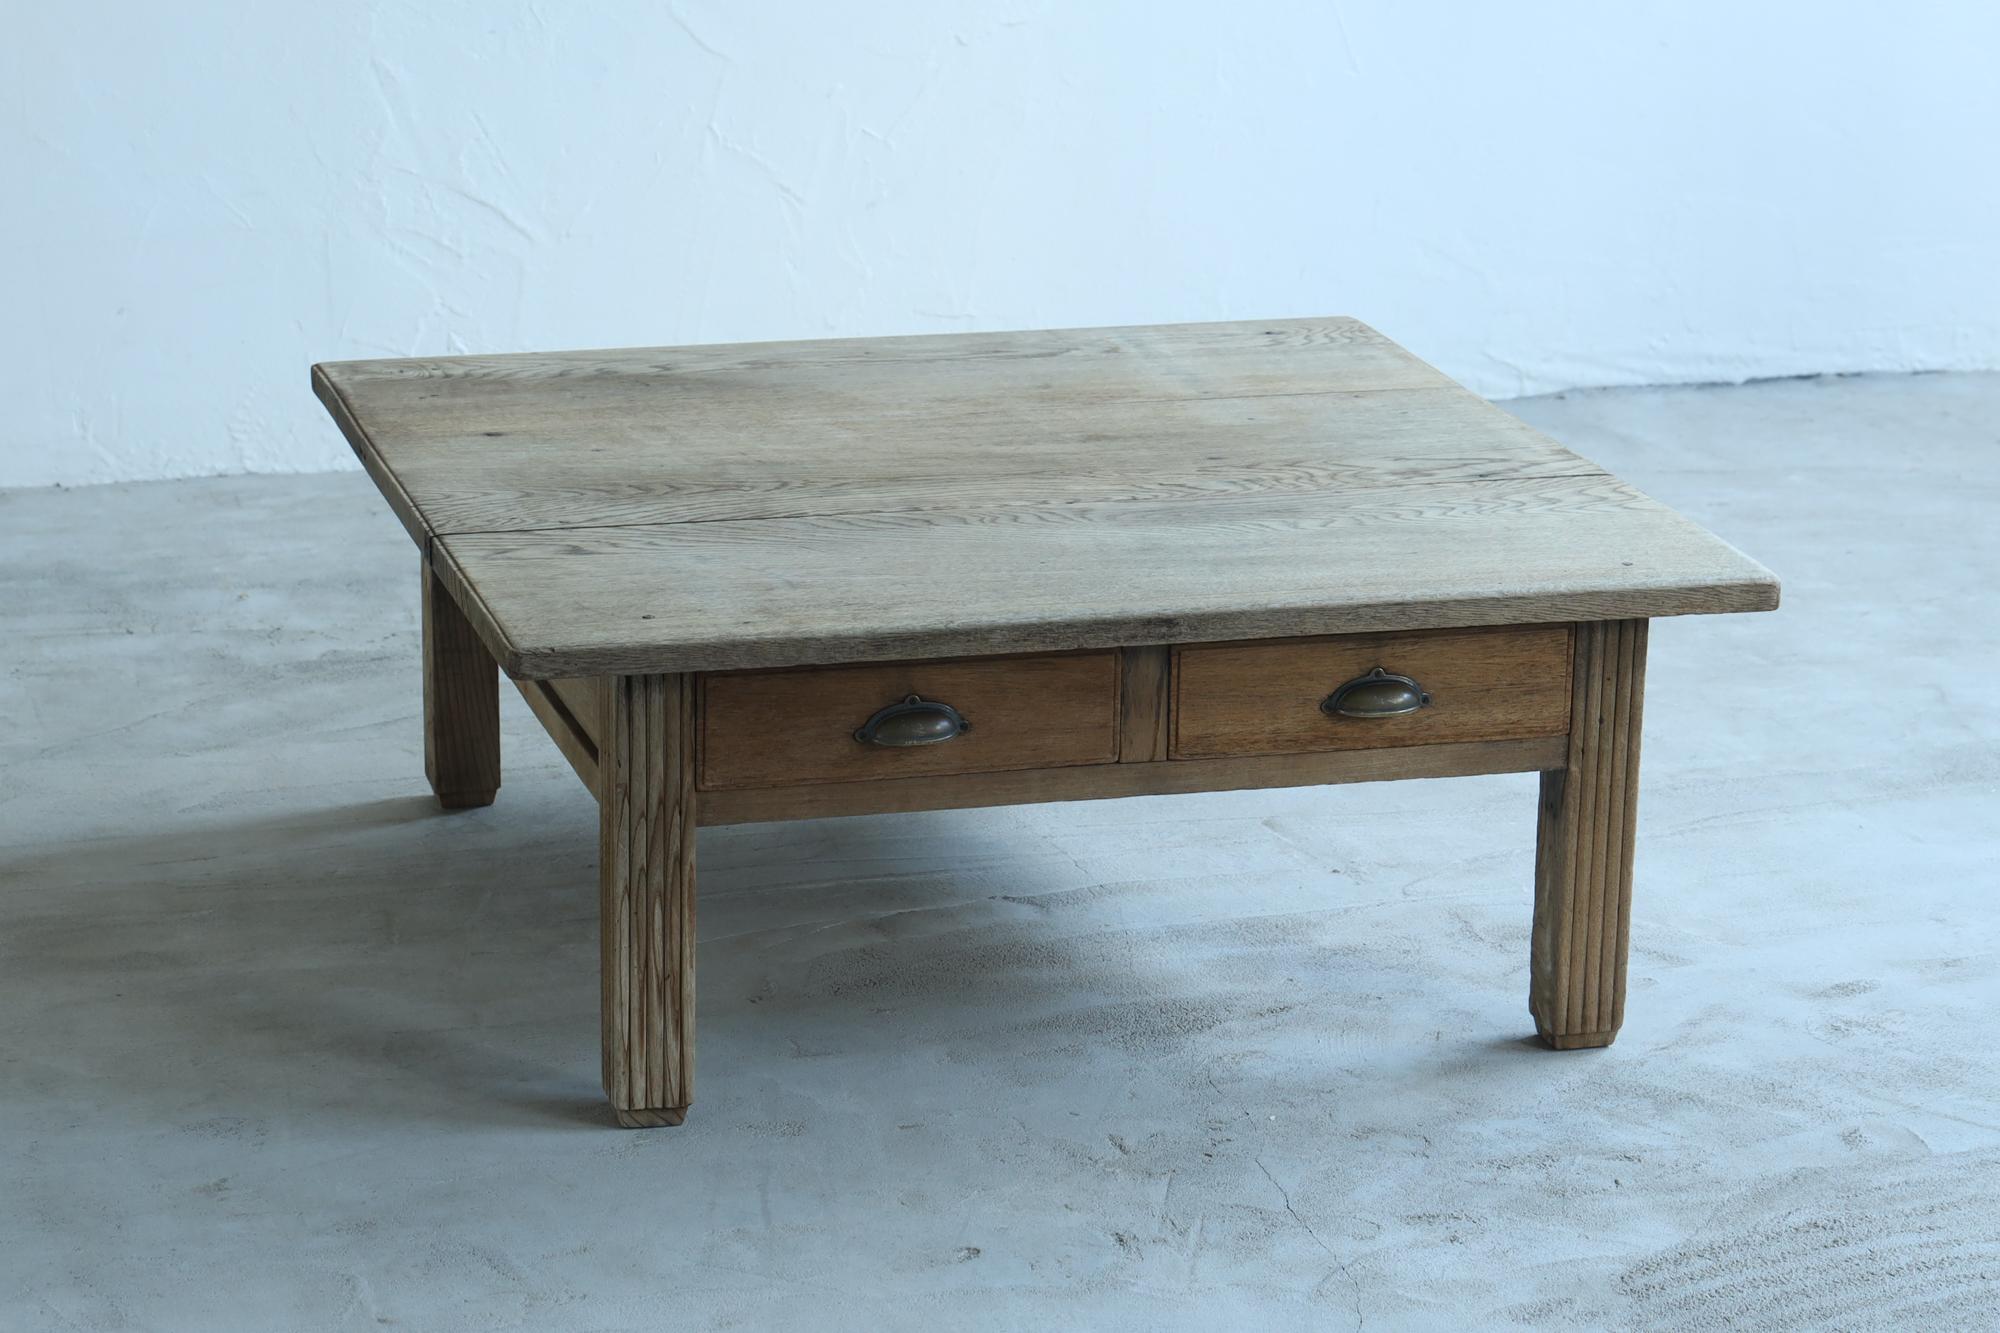 Hand-Crafted Japanese Antique Coffee Table, Desk, Wabi-Sabi, Early 20th Century For Sale